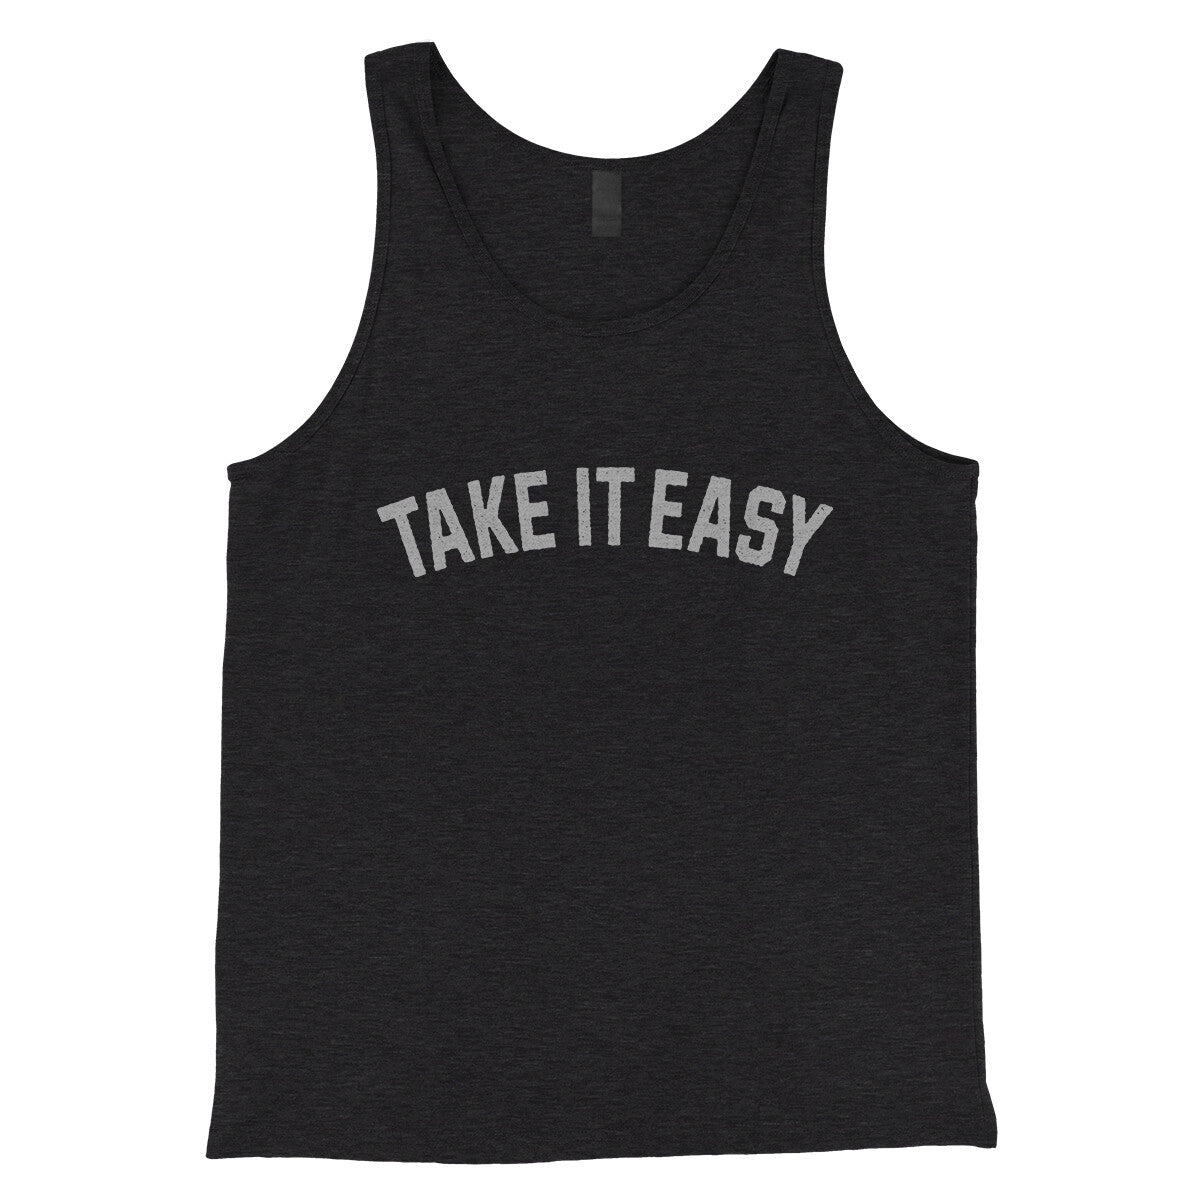 Take it Easy in Charcoal Black TriBlend Color